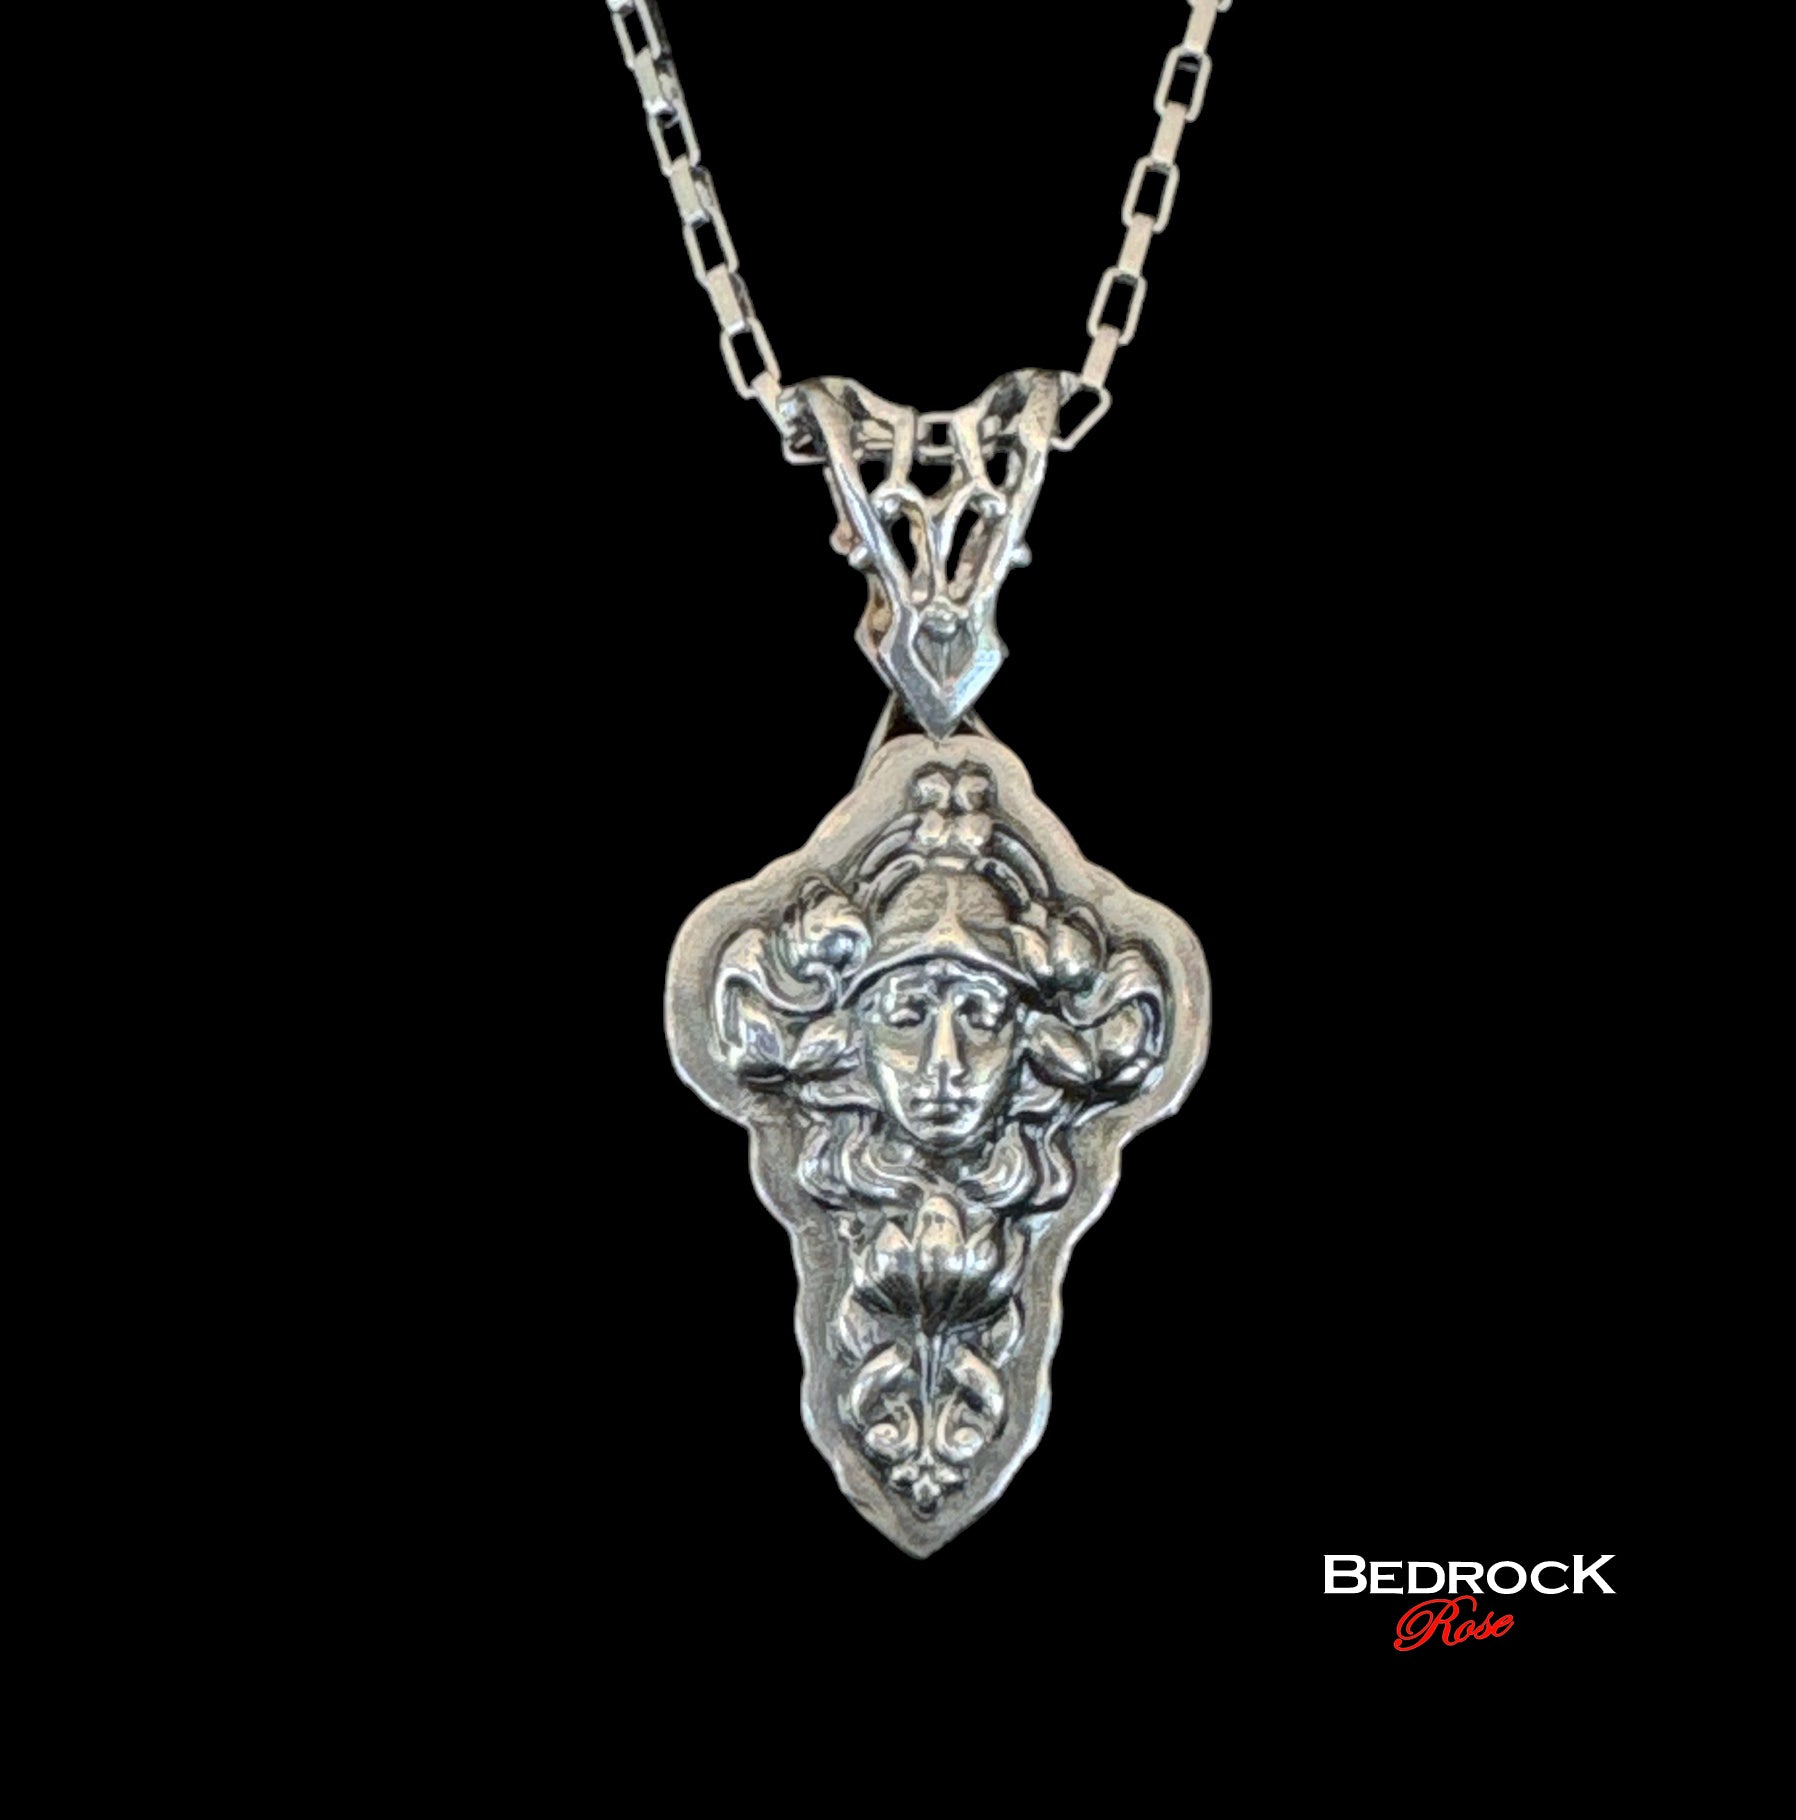 Sterling Silver Art Nouveau Lady Pendant, Hand-pierced bail, Heirloom quality Jewelry, Statement Necklace, Vintage Design, Die-Struck Jewelry, Potter Die